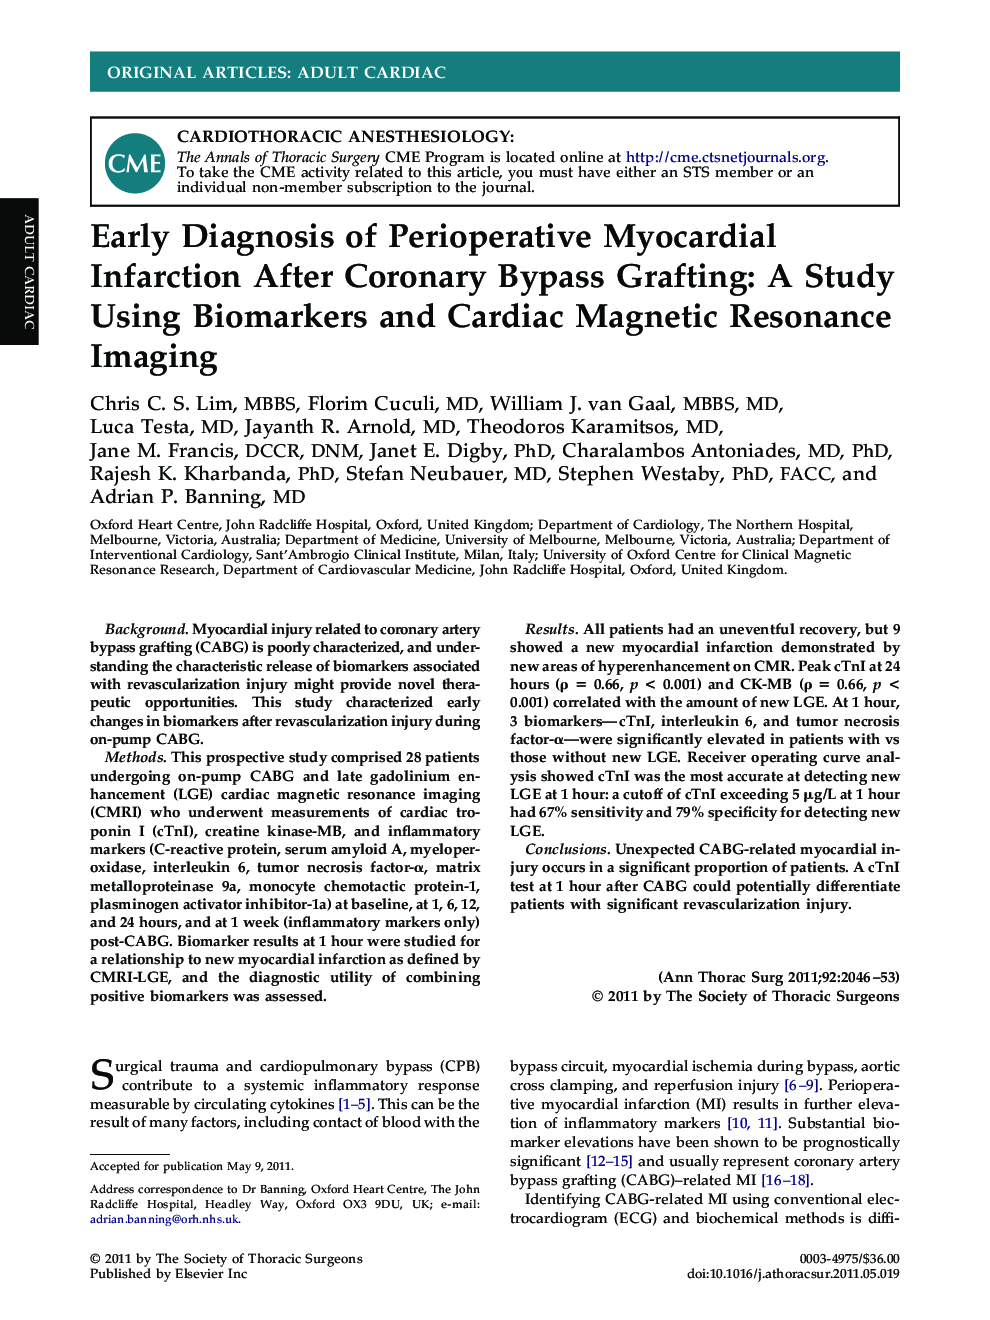 Early Diagnosis of Perioperative Myocardial Infarction After Coronary Bypass Grafting: A Study Using Biomarkers and Cardiac Magnetic Resonance Imaging